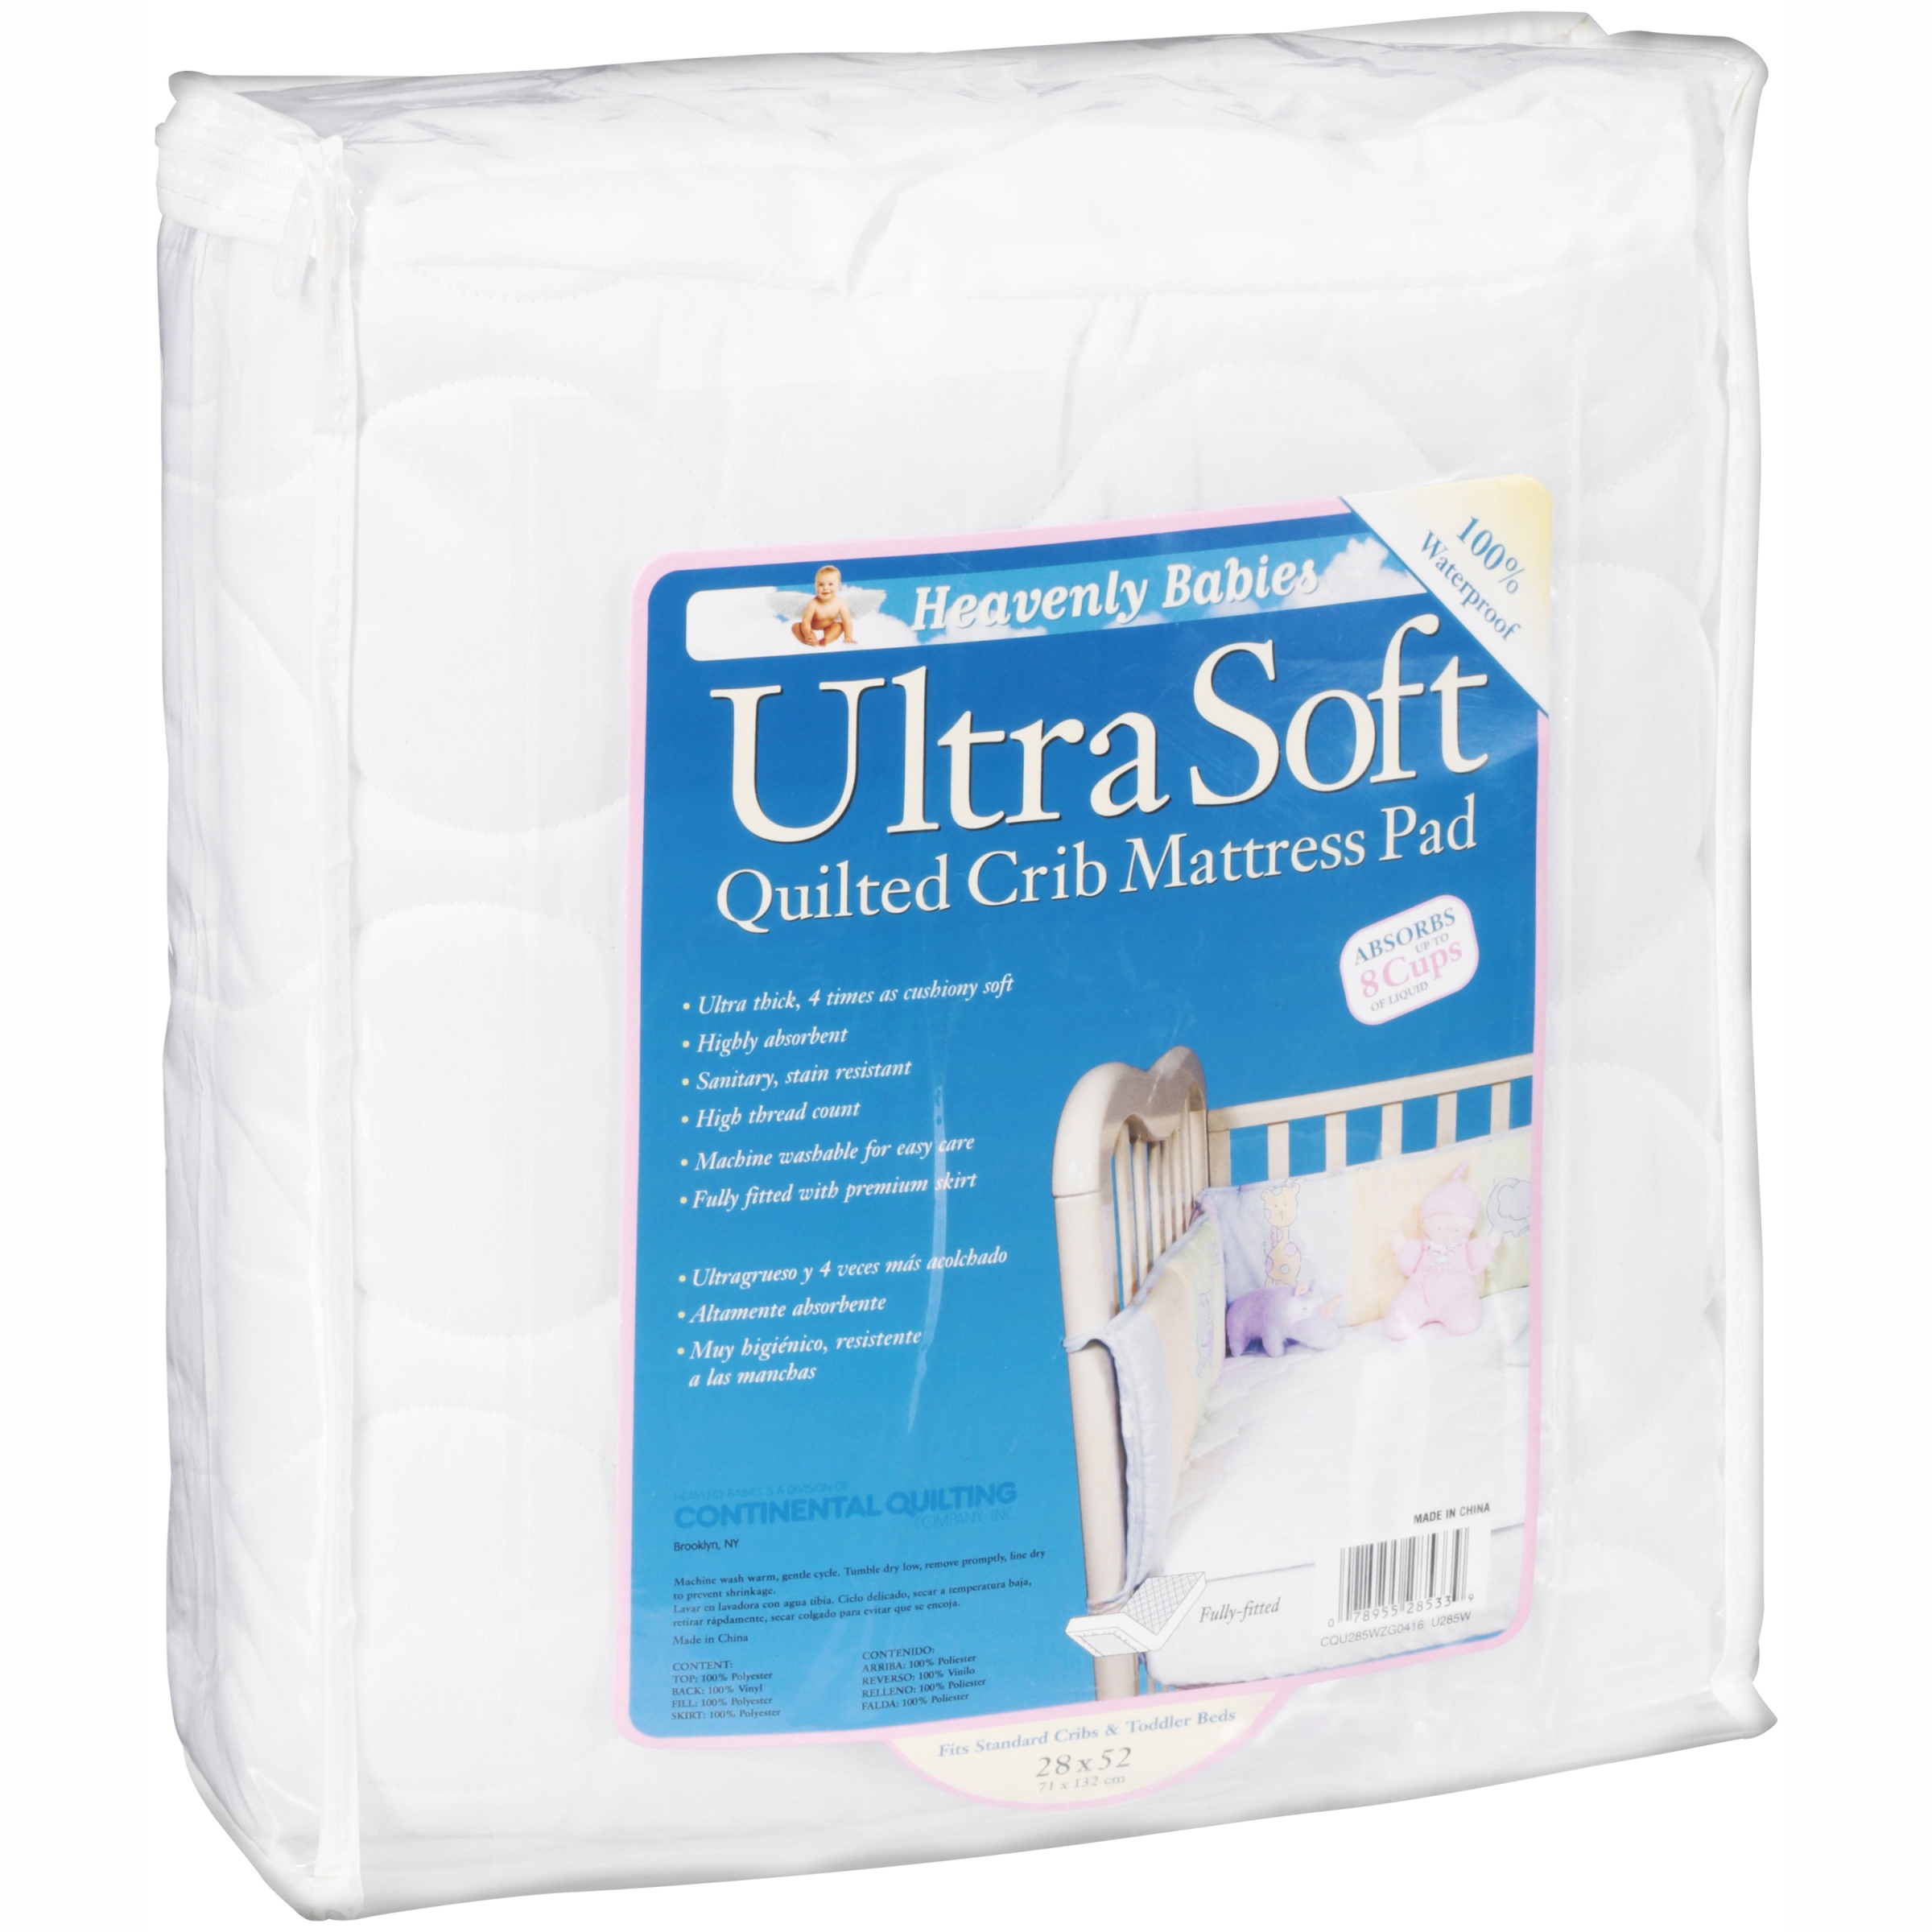 KID-DING - Waterproof Ultra-Soft Quilted Crib Mattress Pad - image 3 of 3